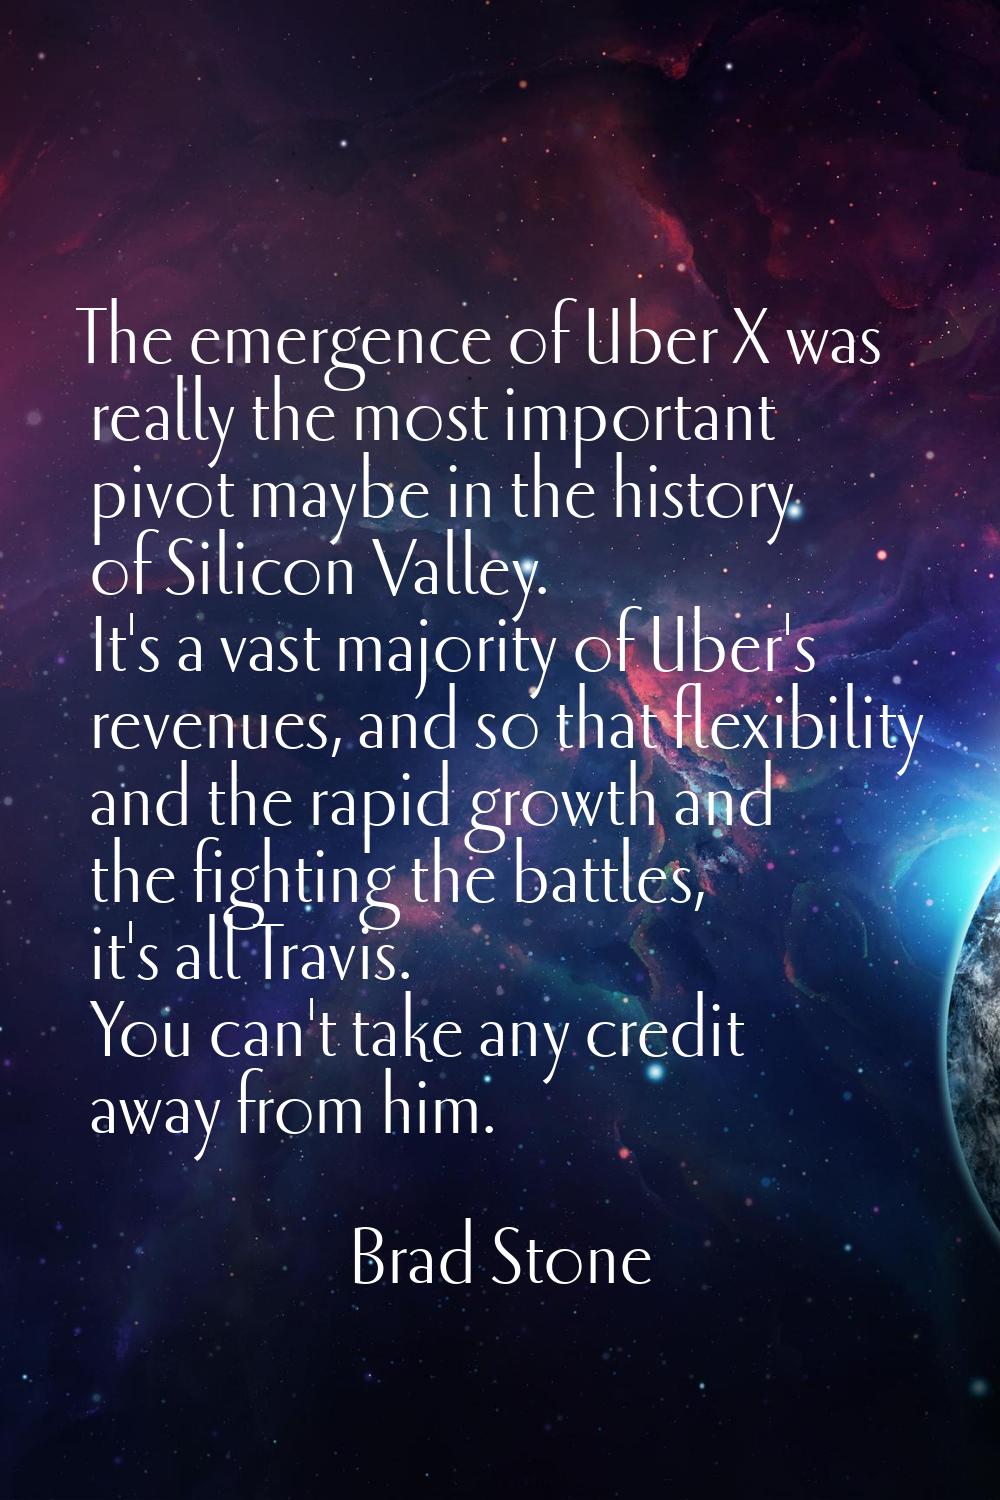 The emergence of Uber X was really the most important pivot maybe in the history of Silicon Valley.